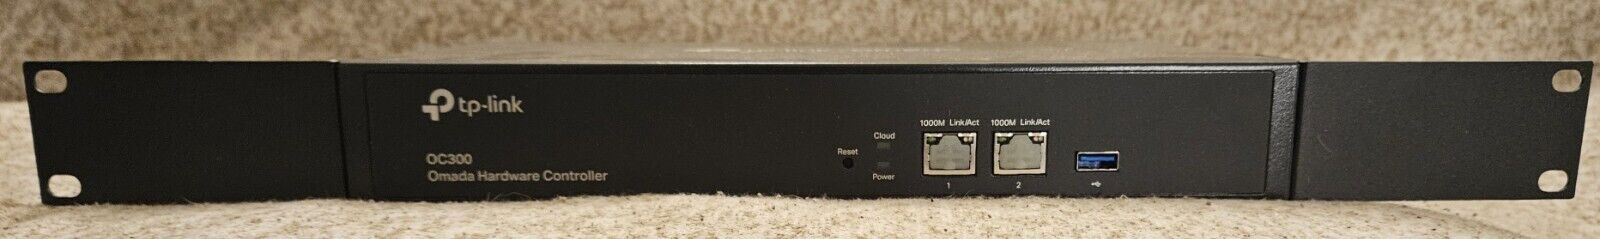 TP-Link OC300 OMADA 500-Device Hardware Network Controller -- NEW -- Never Used